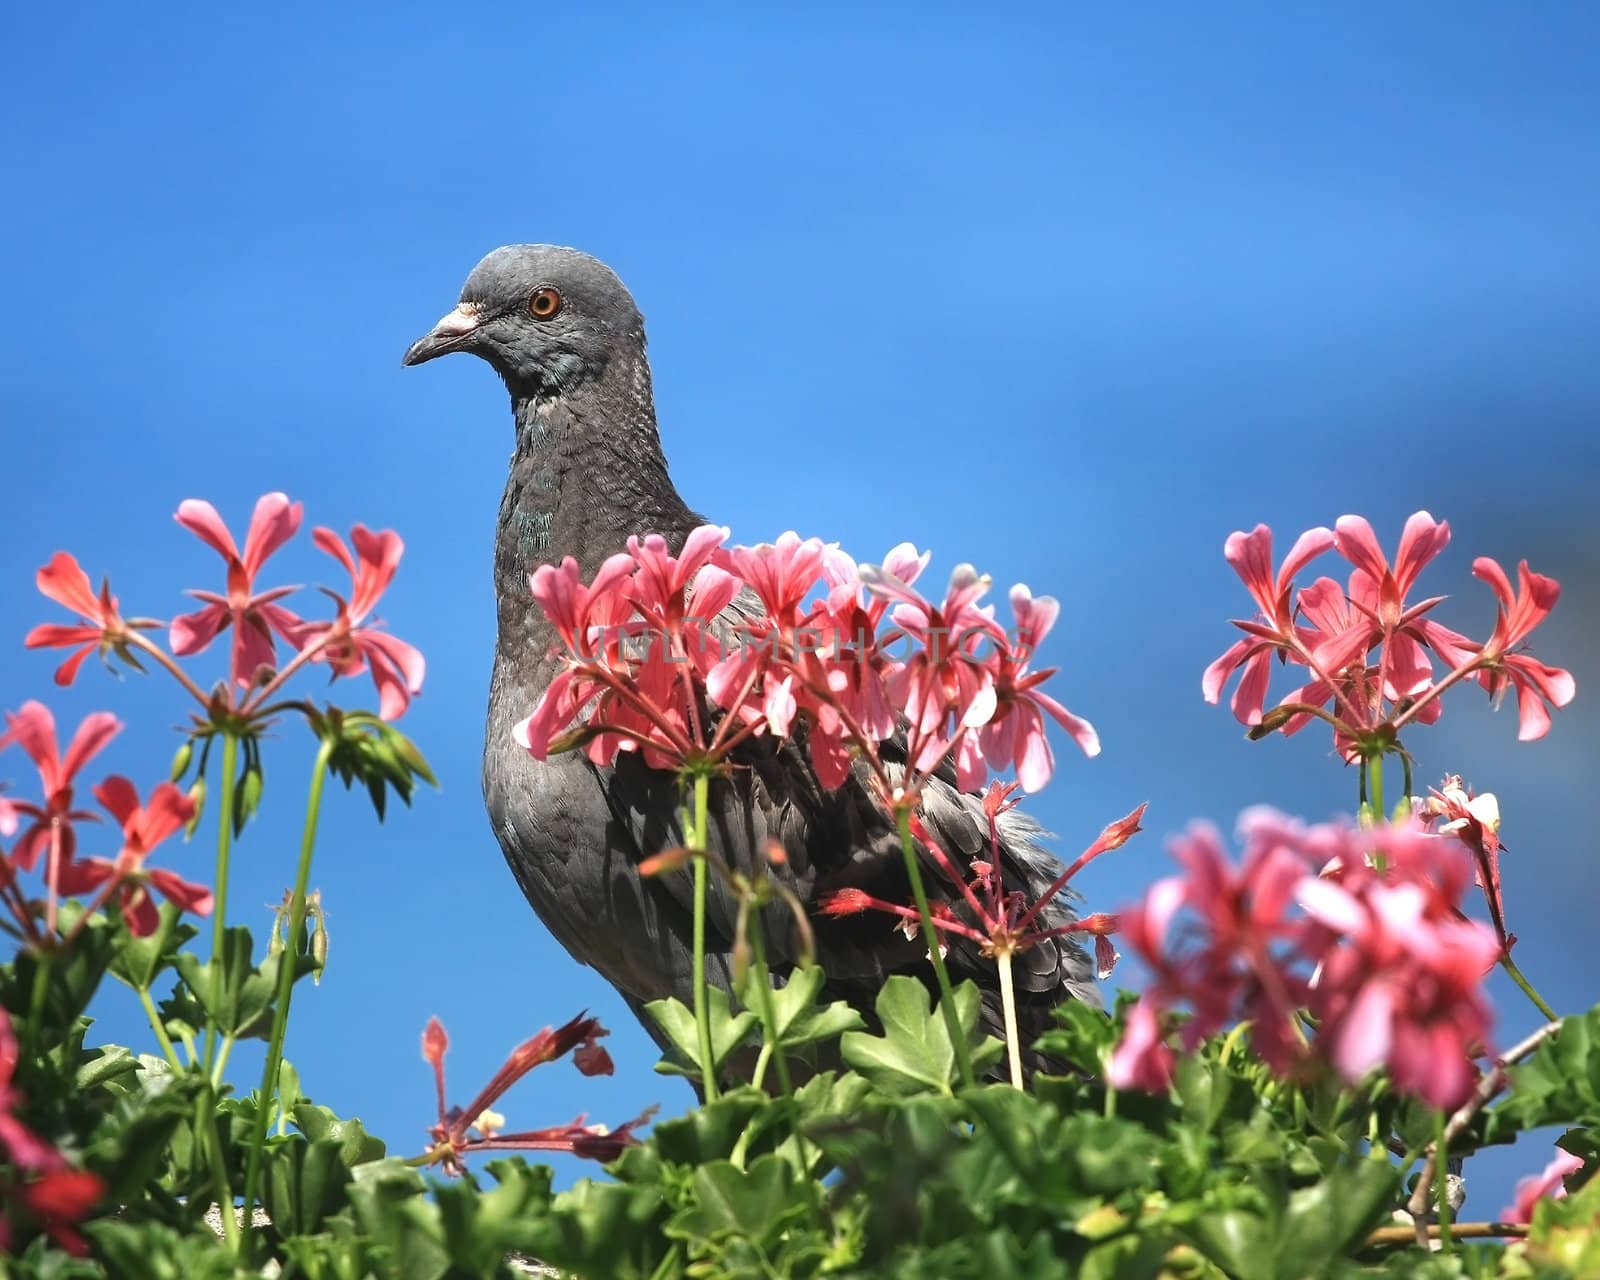 Close view of a pigeon standing behind red flowers